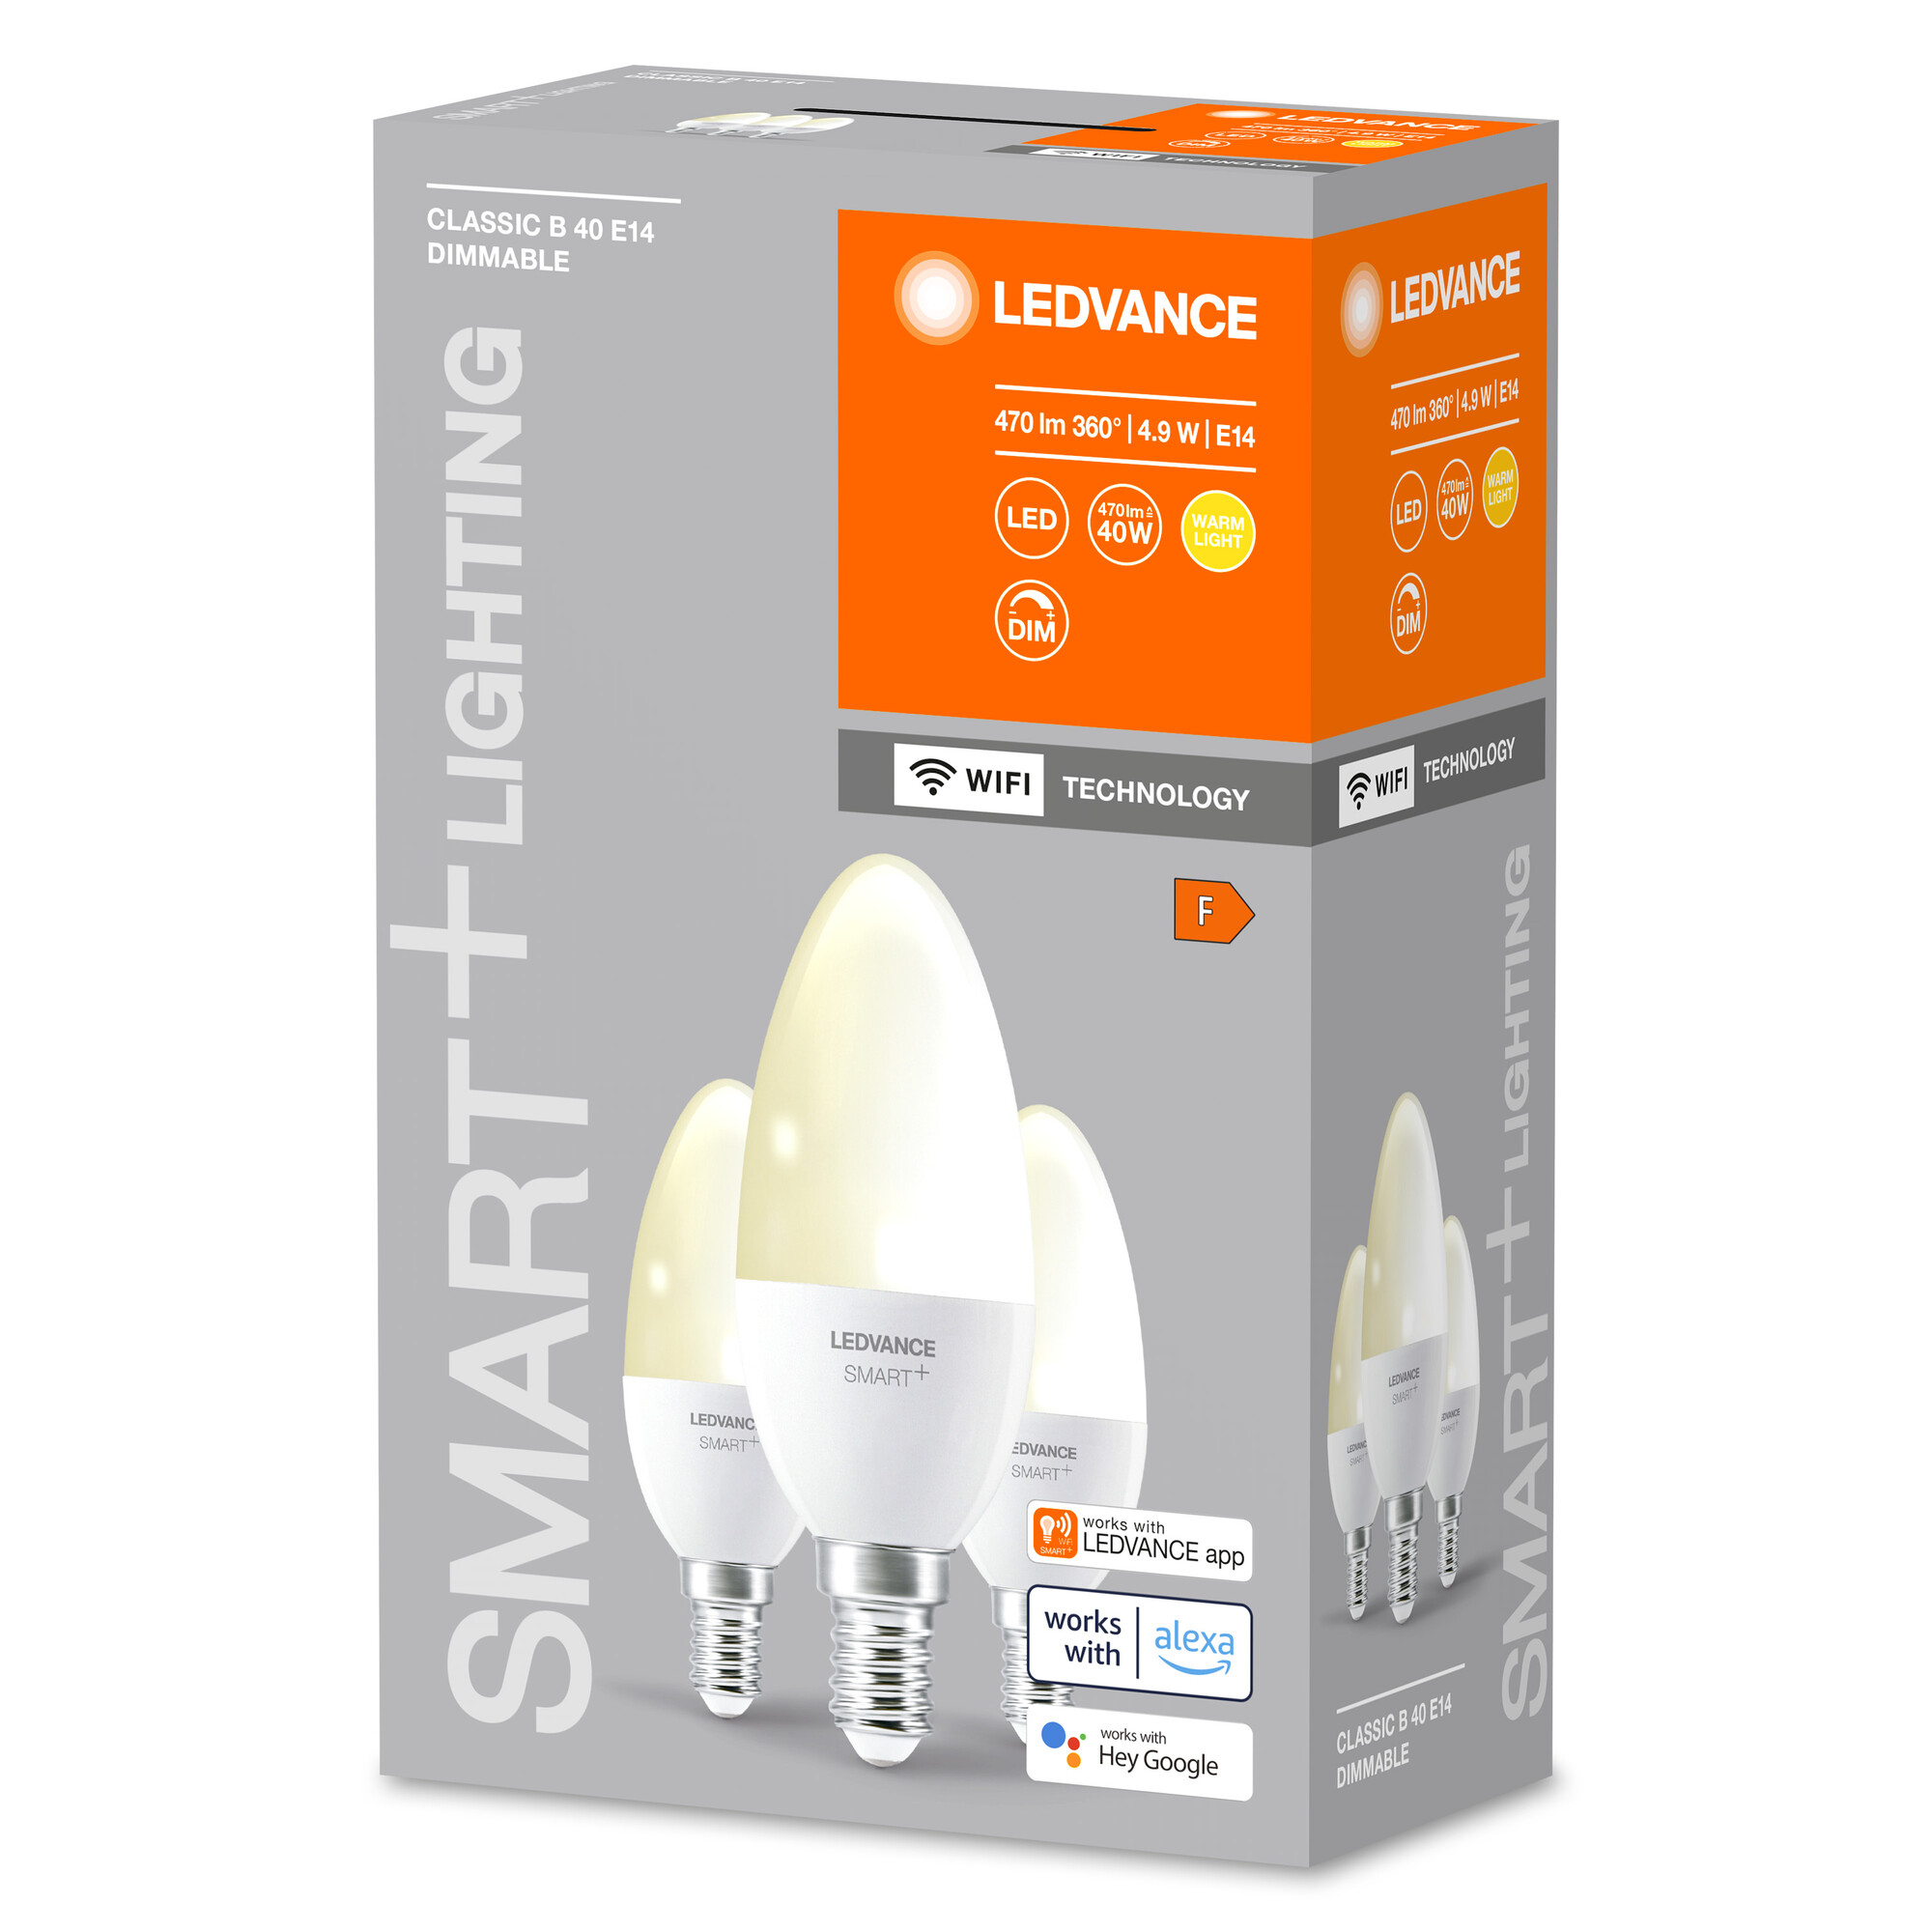 LED-Kerzenlampe 'Smart+ WiFi CLB' warmweiß 4,9 W E14 470 lm, dimmbar 3er-Pack + product picture